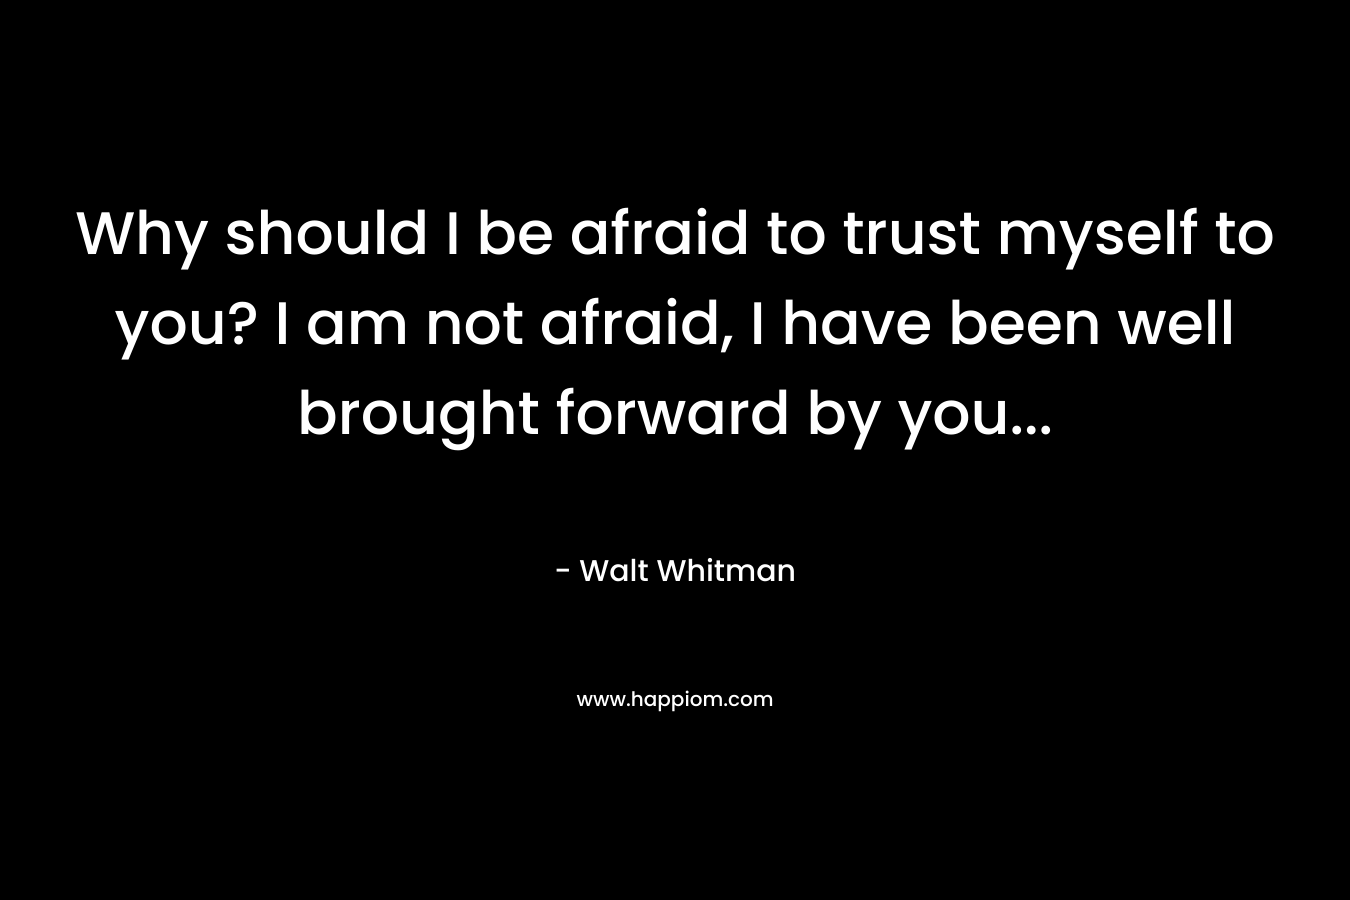 Why should I be afraid to trust myself to you? I am not afraid, I have been well brought forward by you...